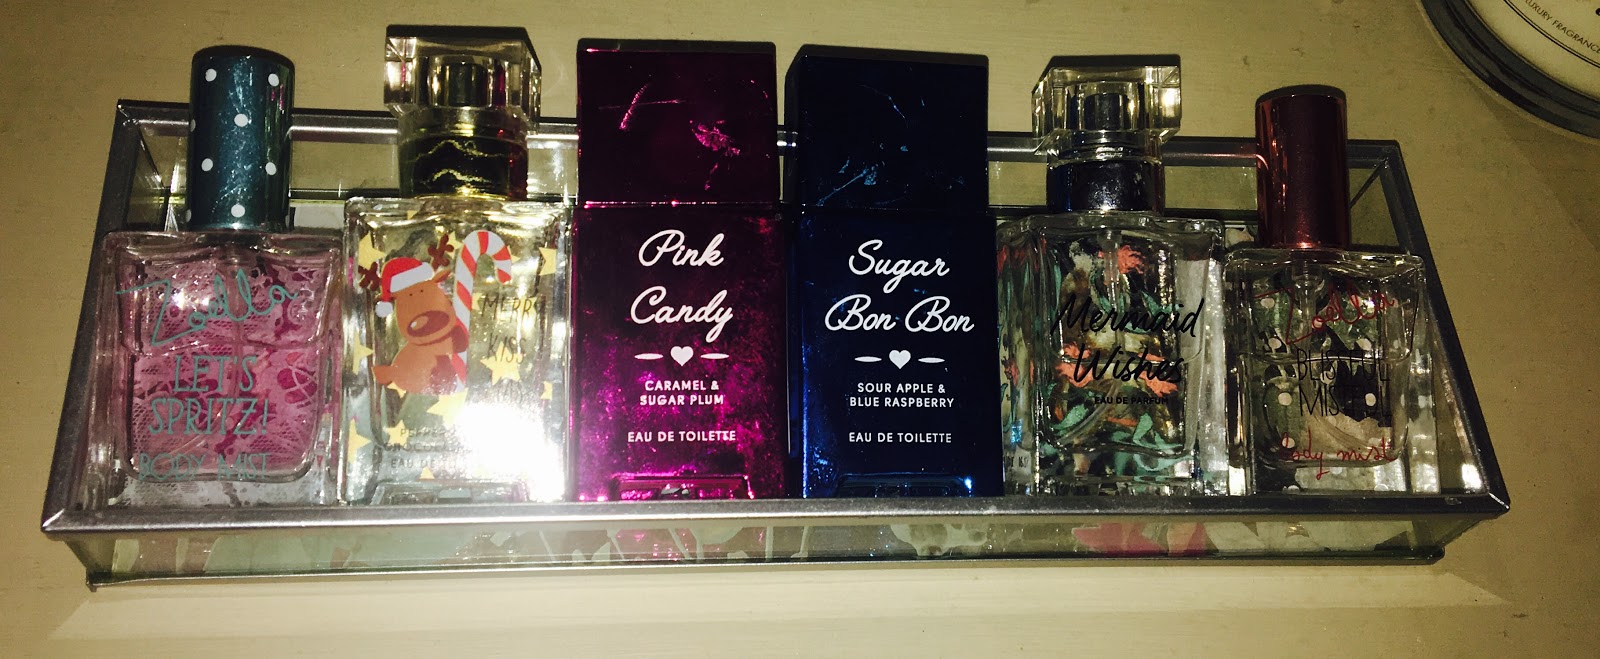 pink candy perfume primark